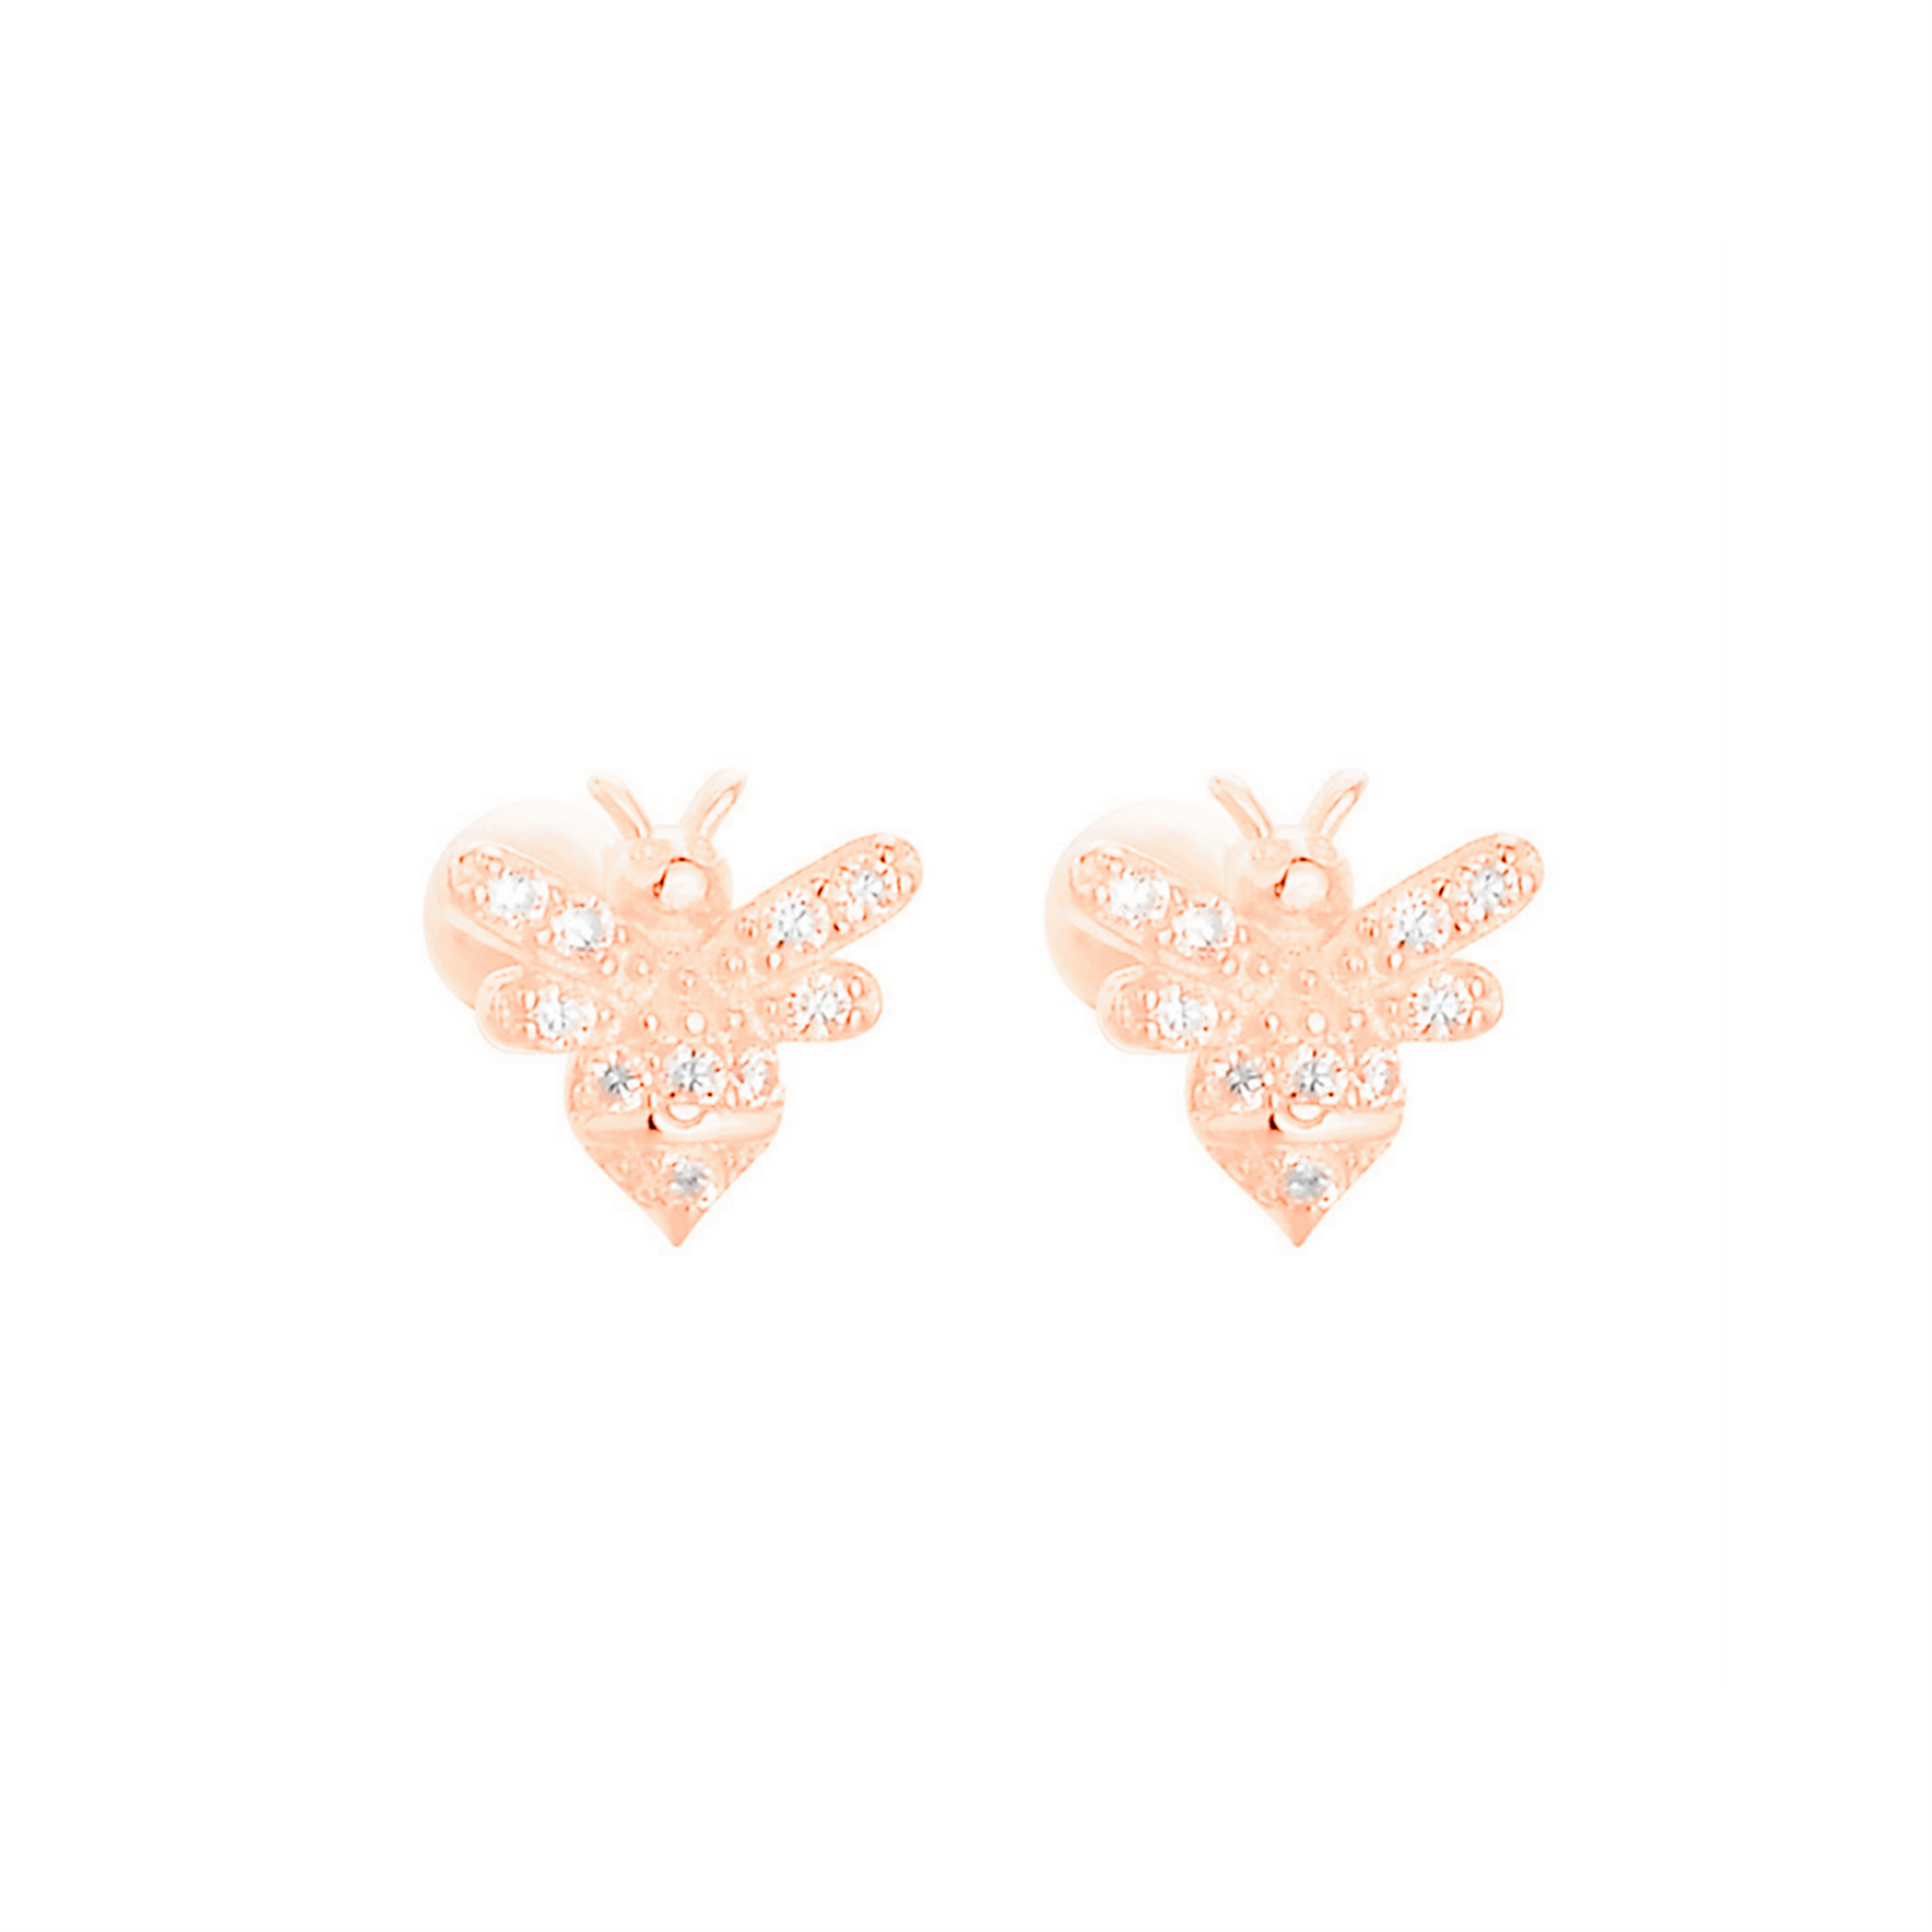 Bee Stud Earrings with CZ Beads and Screwbacks in Rose Gold, 18K Gold & Sterling silver - sugarkittenlondon